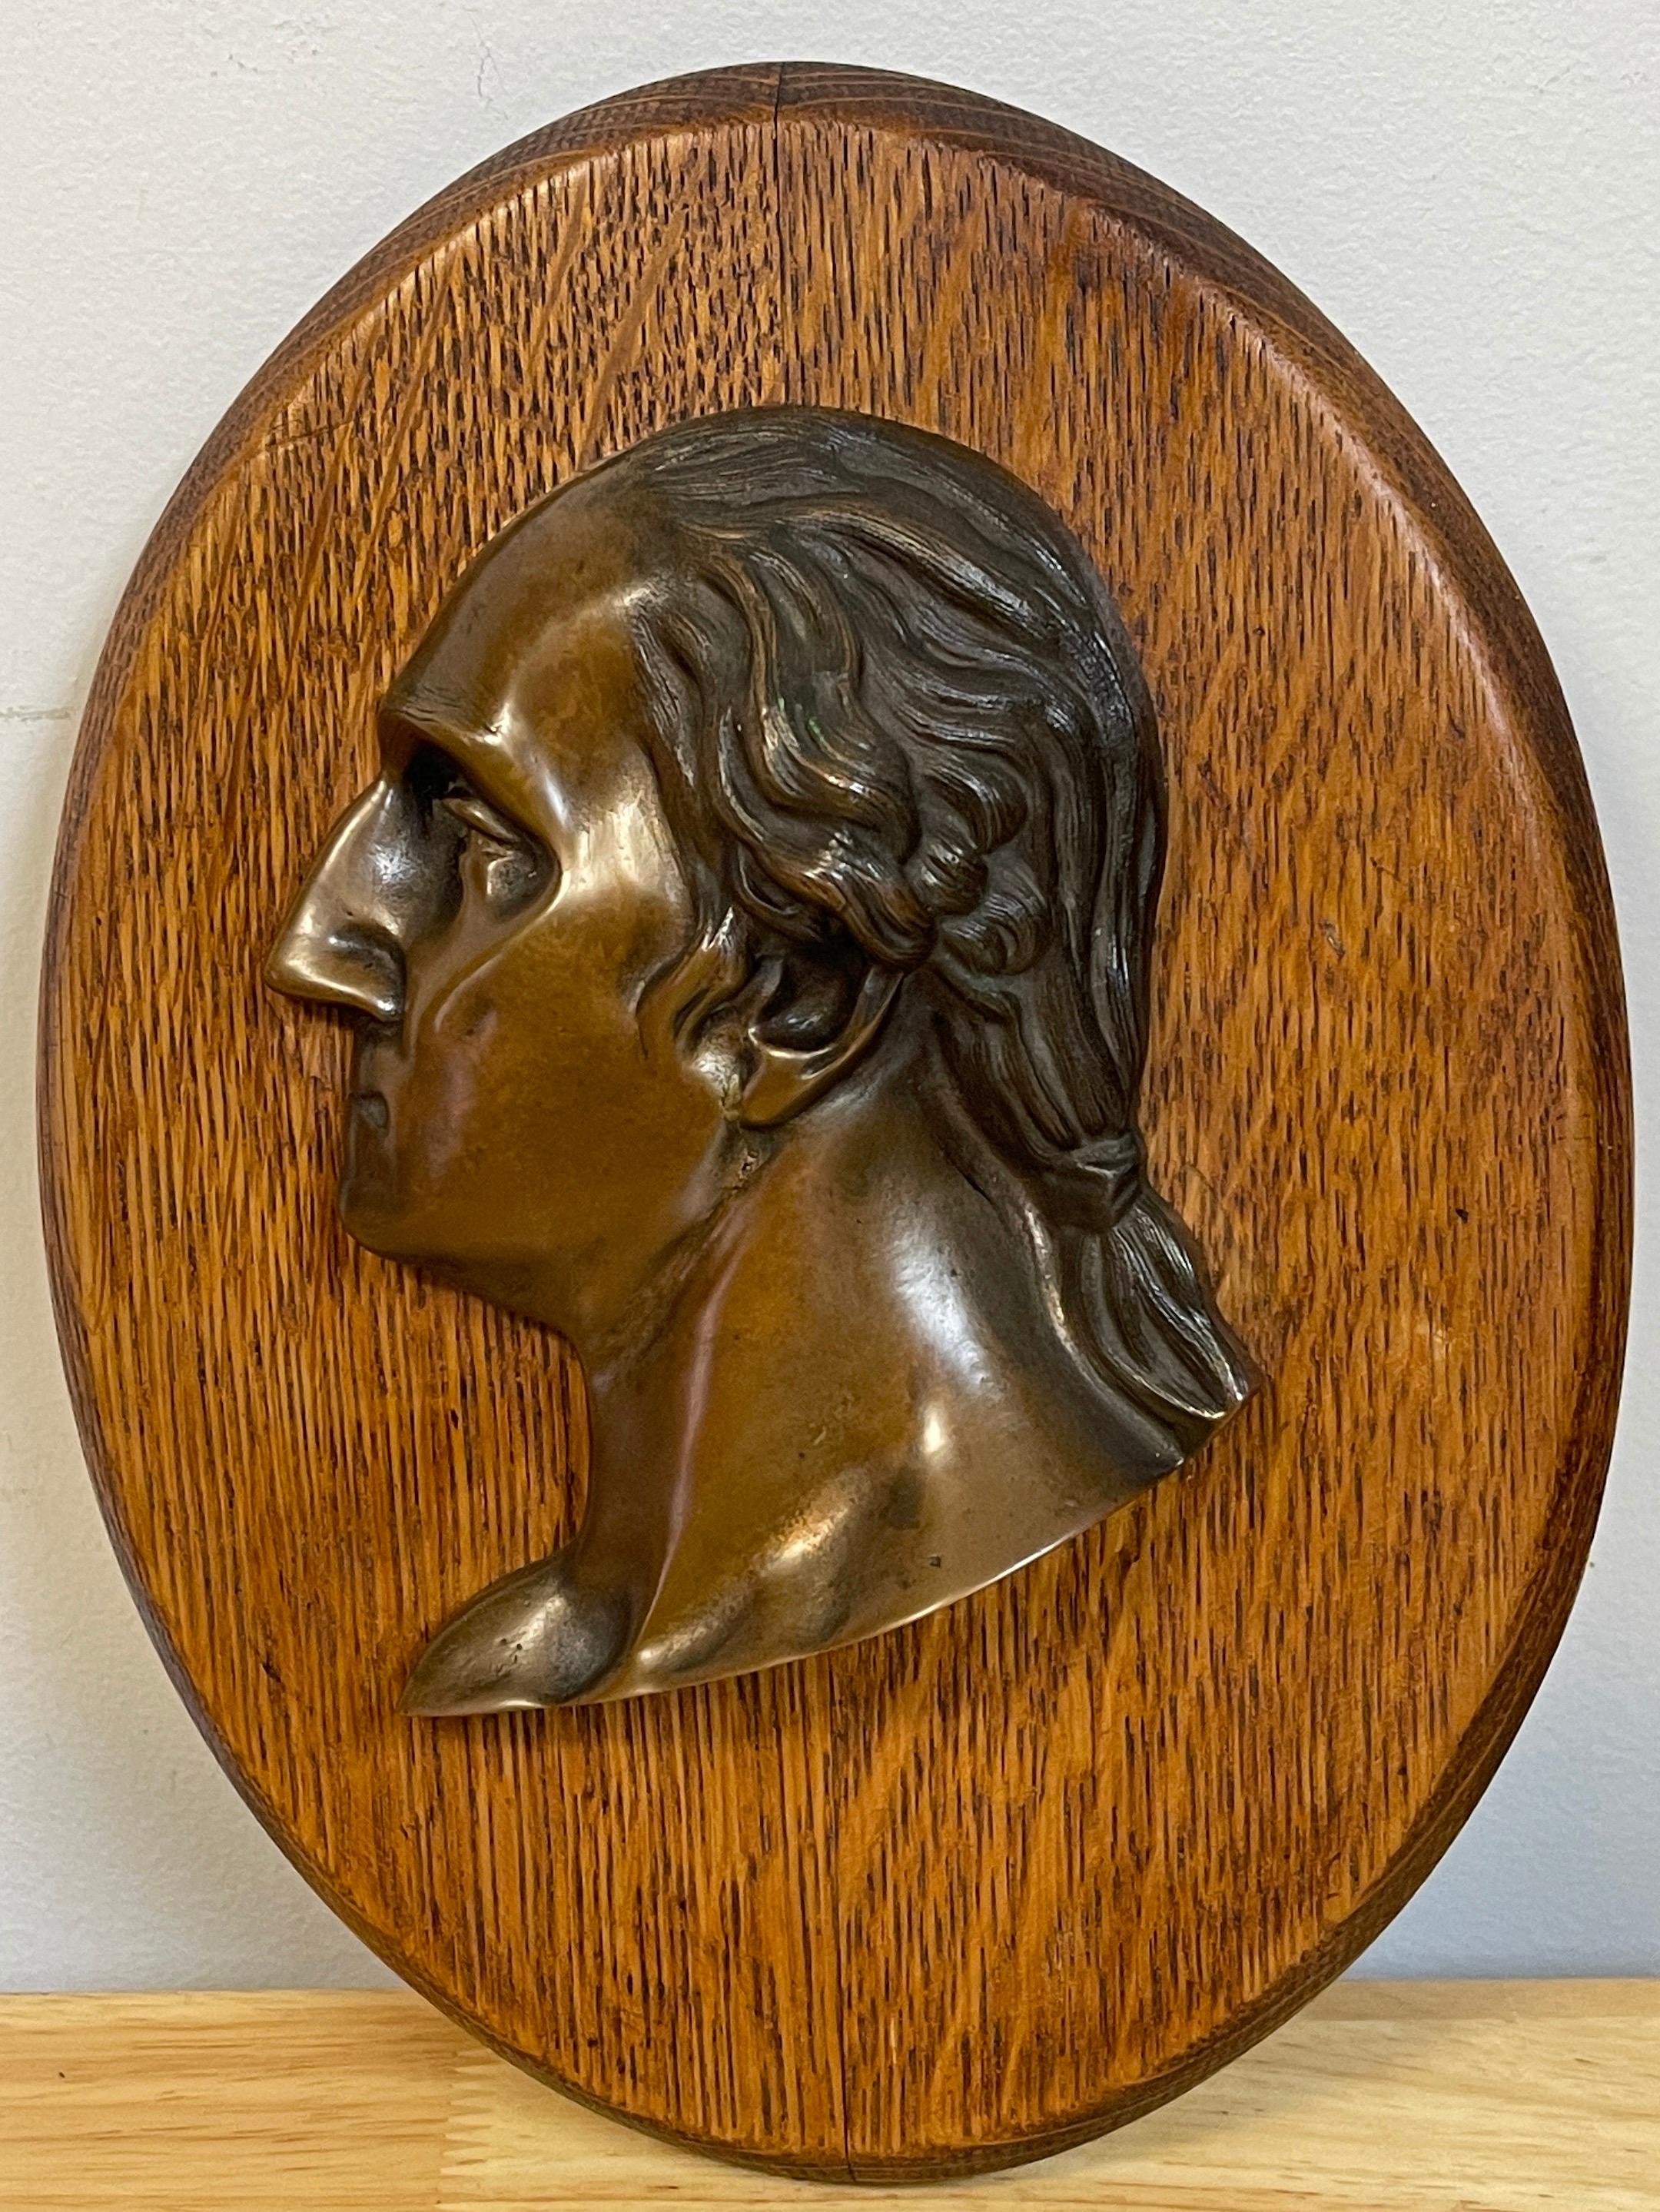 Antique bronze portrait plaque of George Washington, C 1890
Possibly after Jean-Antoine Houdon, finely cast side profile with Washington's hair tied back, mounted on an oval 9